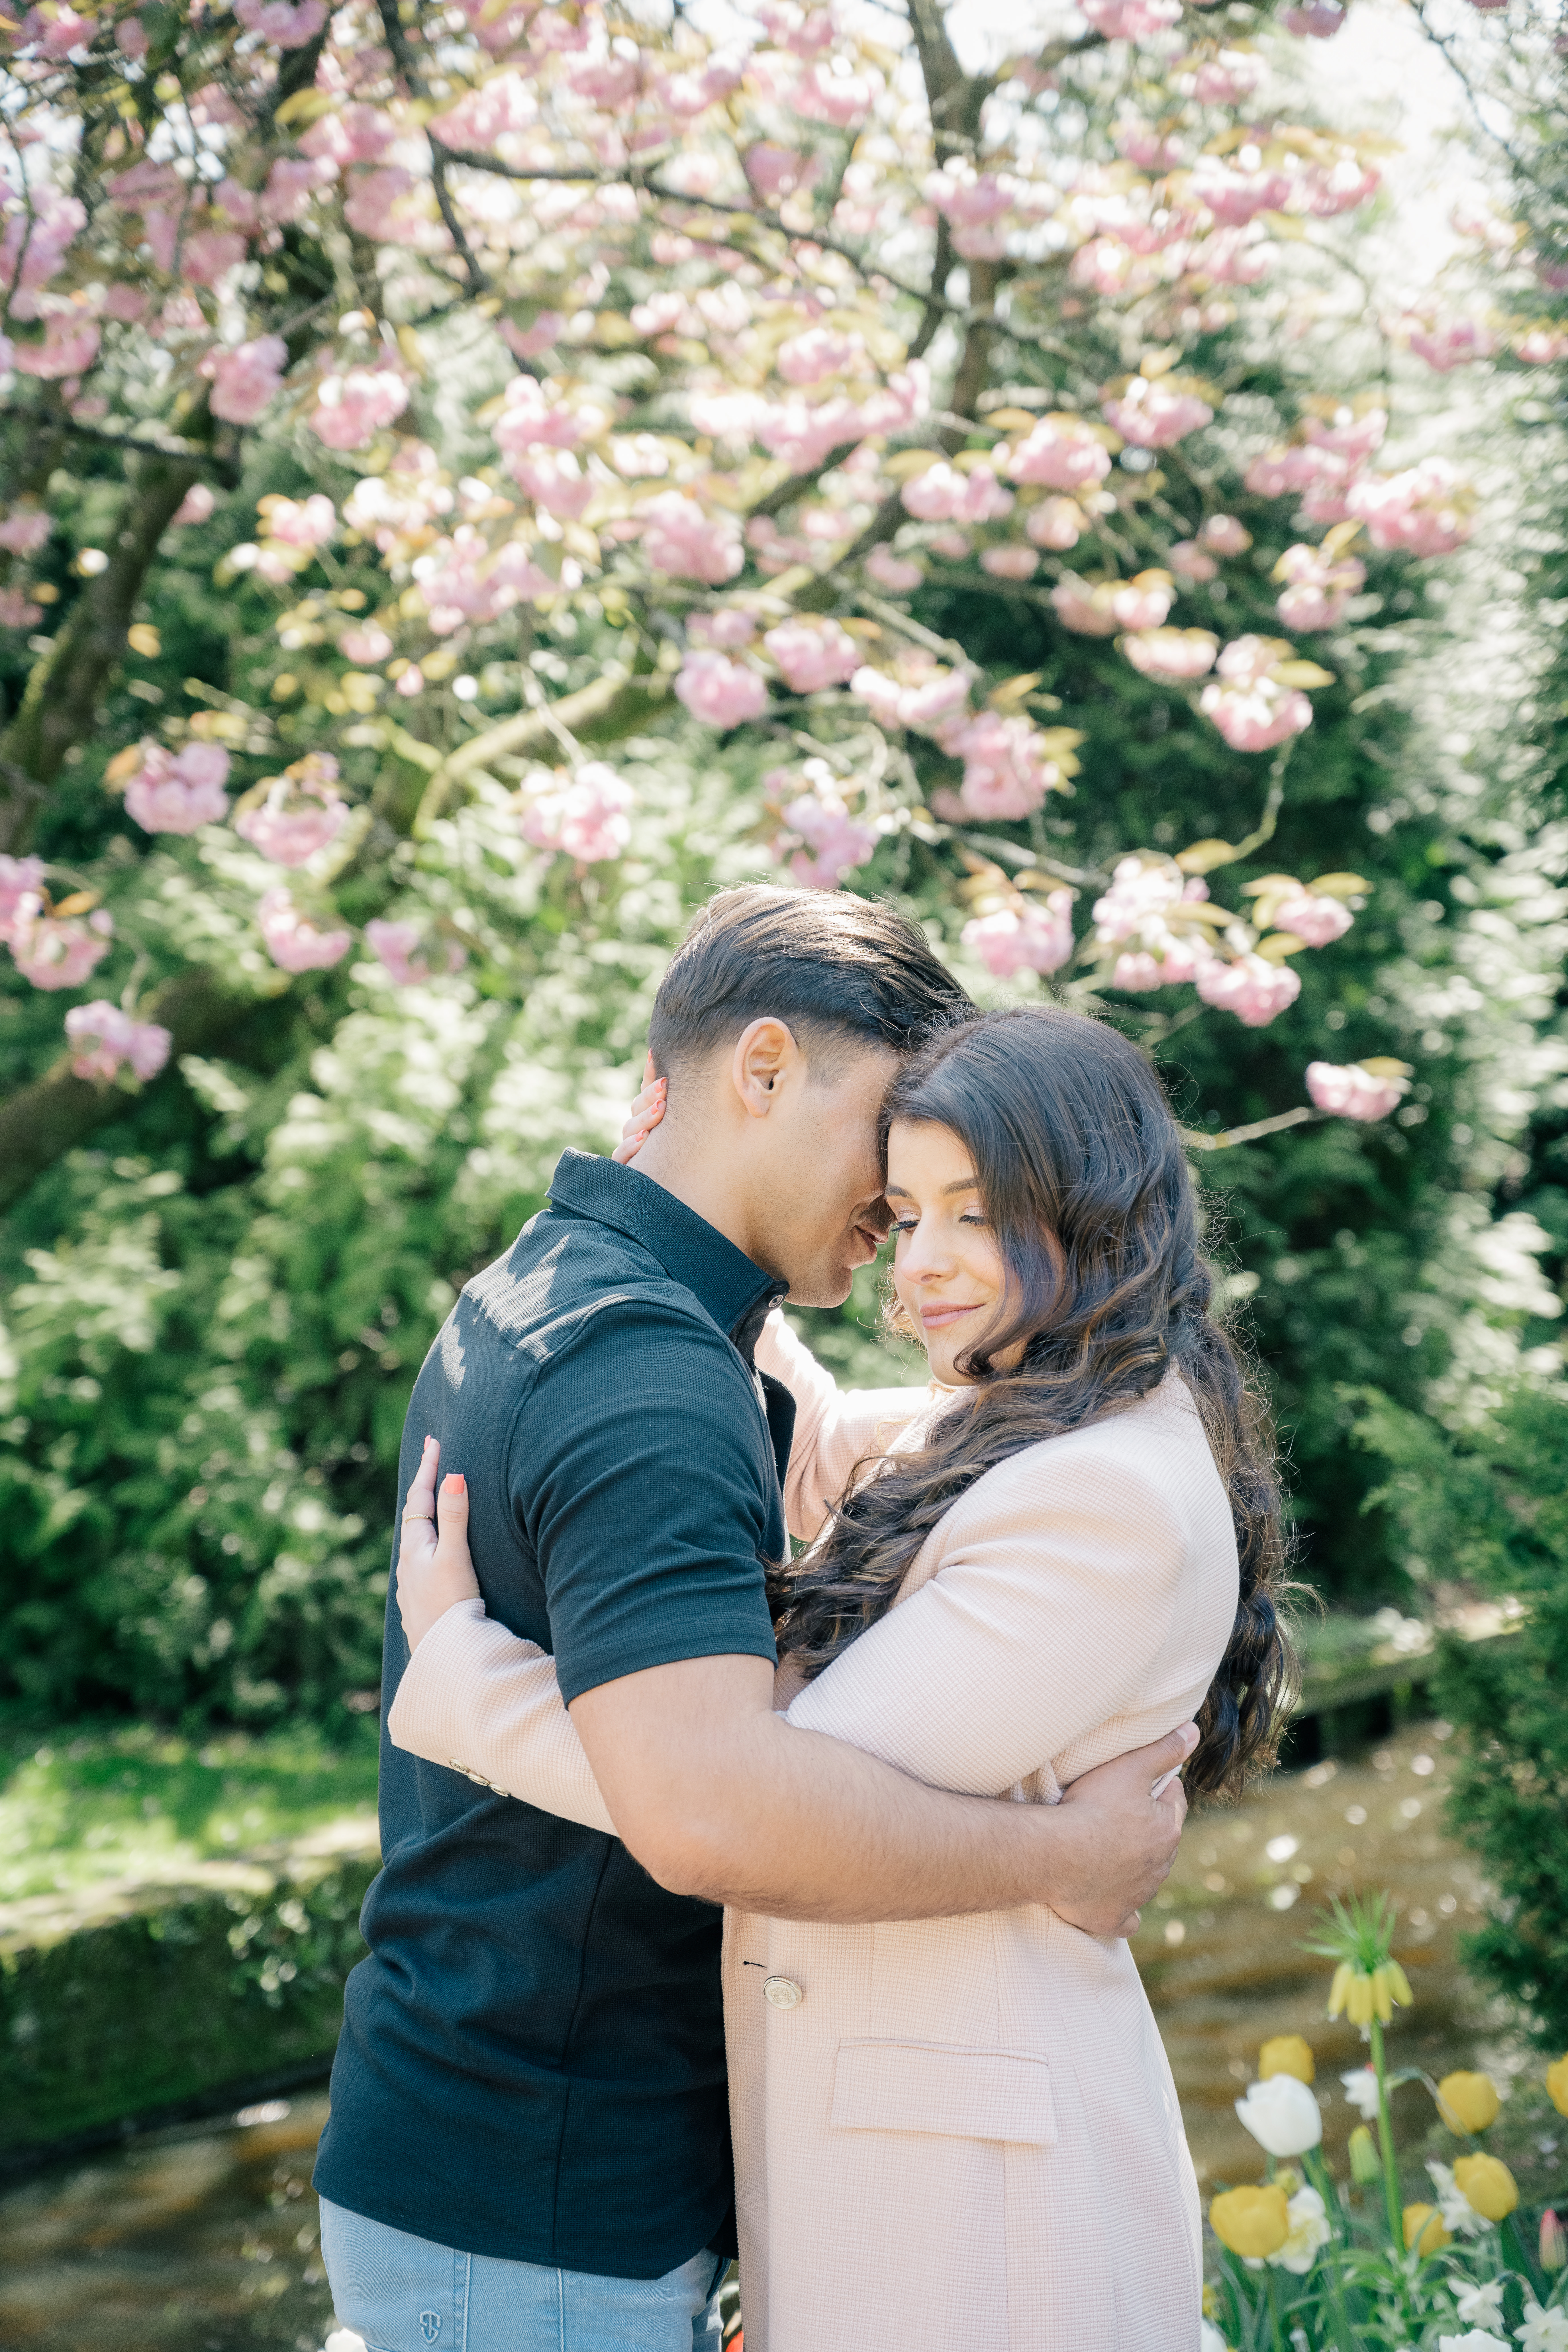 anniversary photoshoot with husband and wife embracing and foreheads touchingunder a blooming magnolia tree in the keukenhof garden